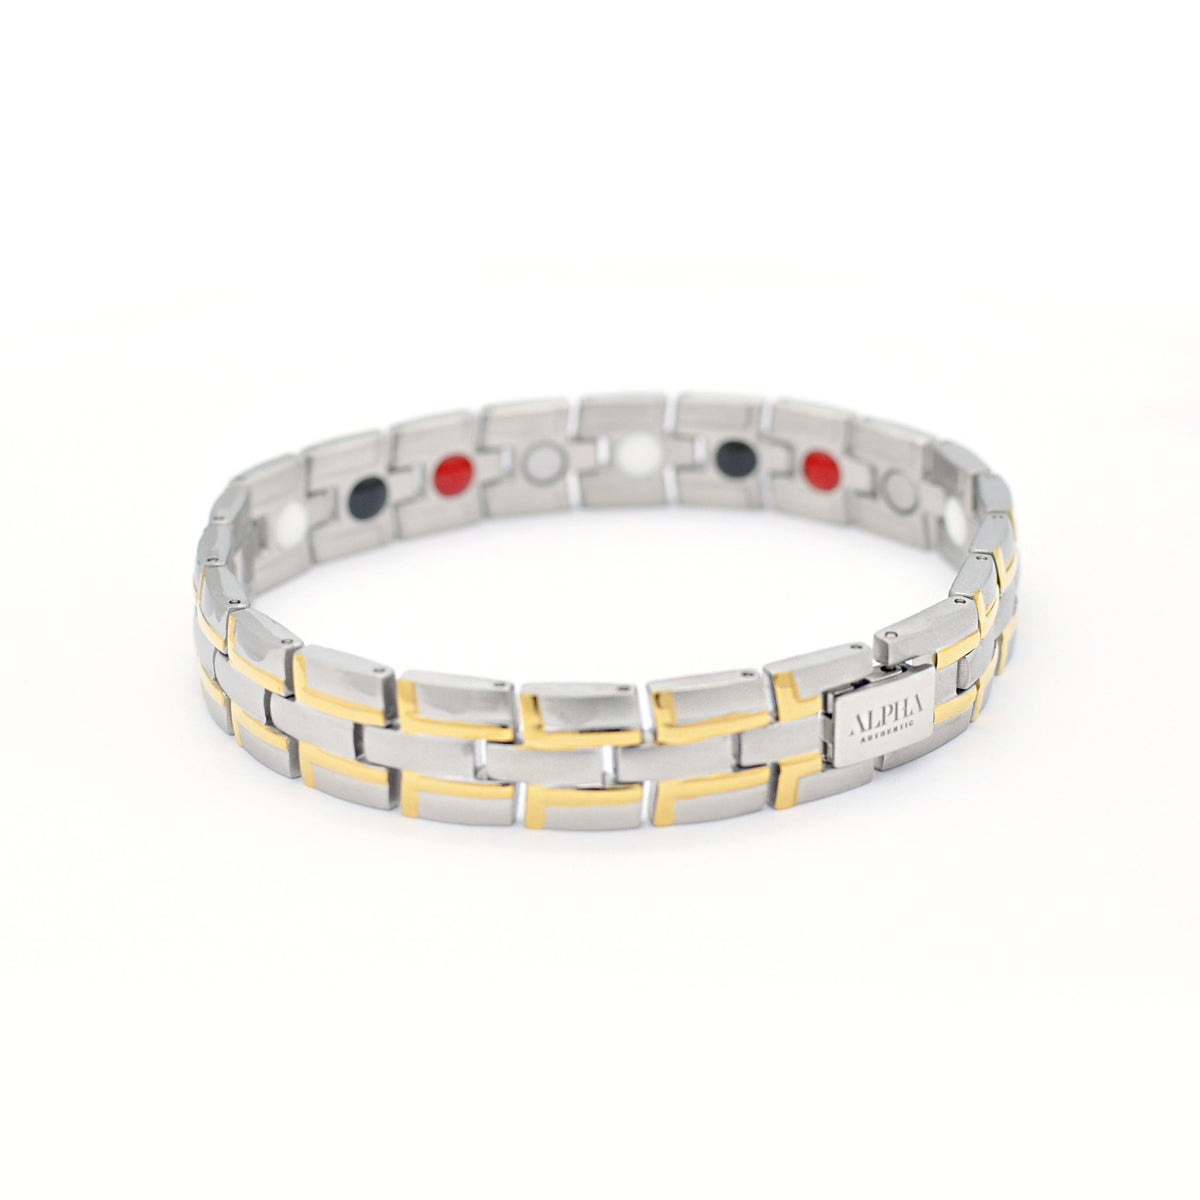 LUCKY CHOICE 92.5 BIS Hallmark Sterling Pure Silver Curb Bracelet for Men's  & Boys, Length : 8.5 Inches, CM : 21.59, WT : 24 GM : Amazon.in: Jewellery